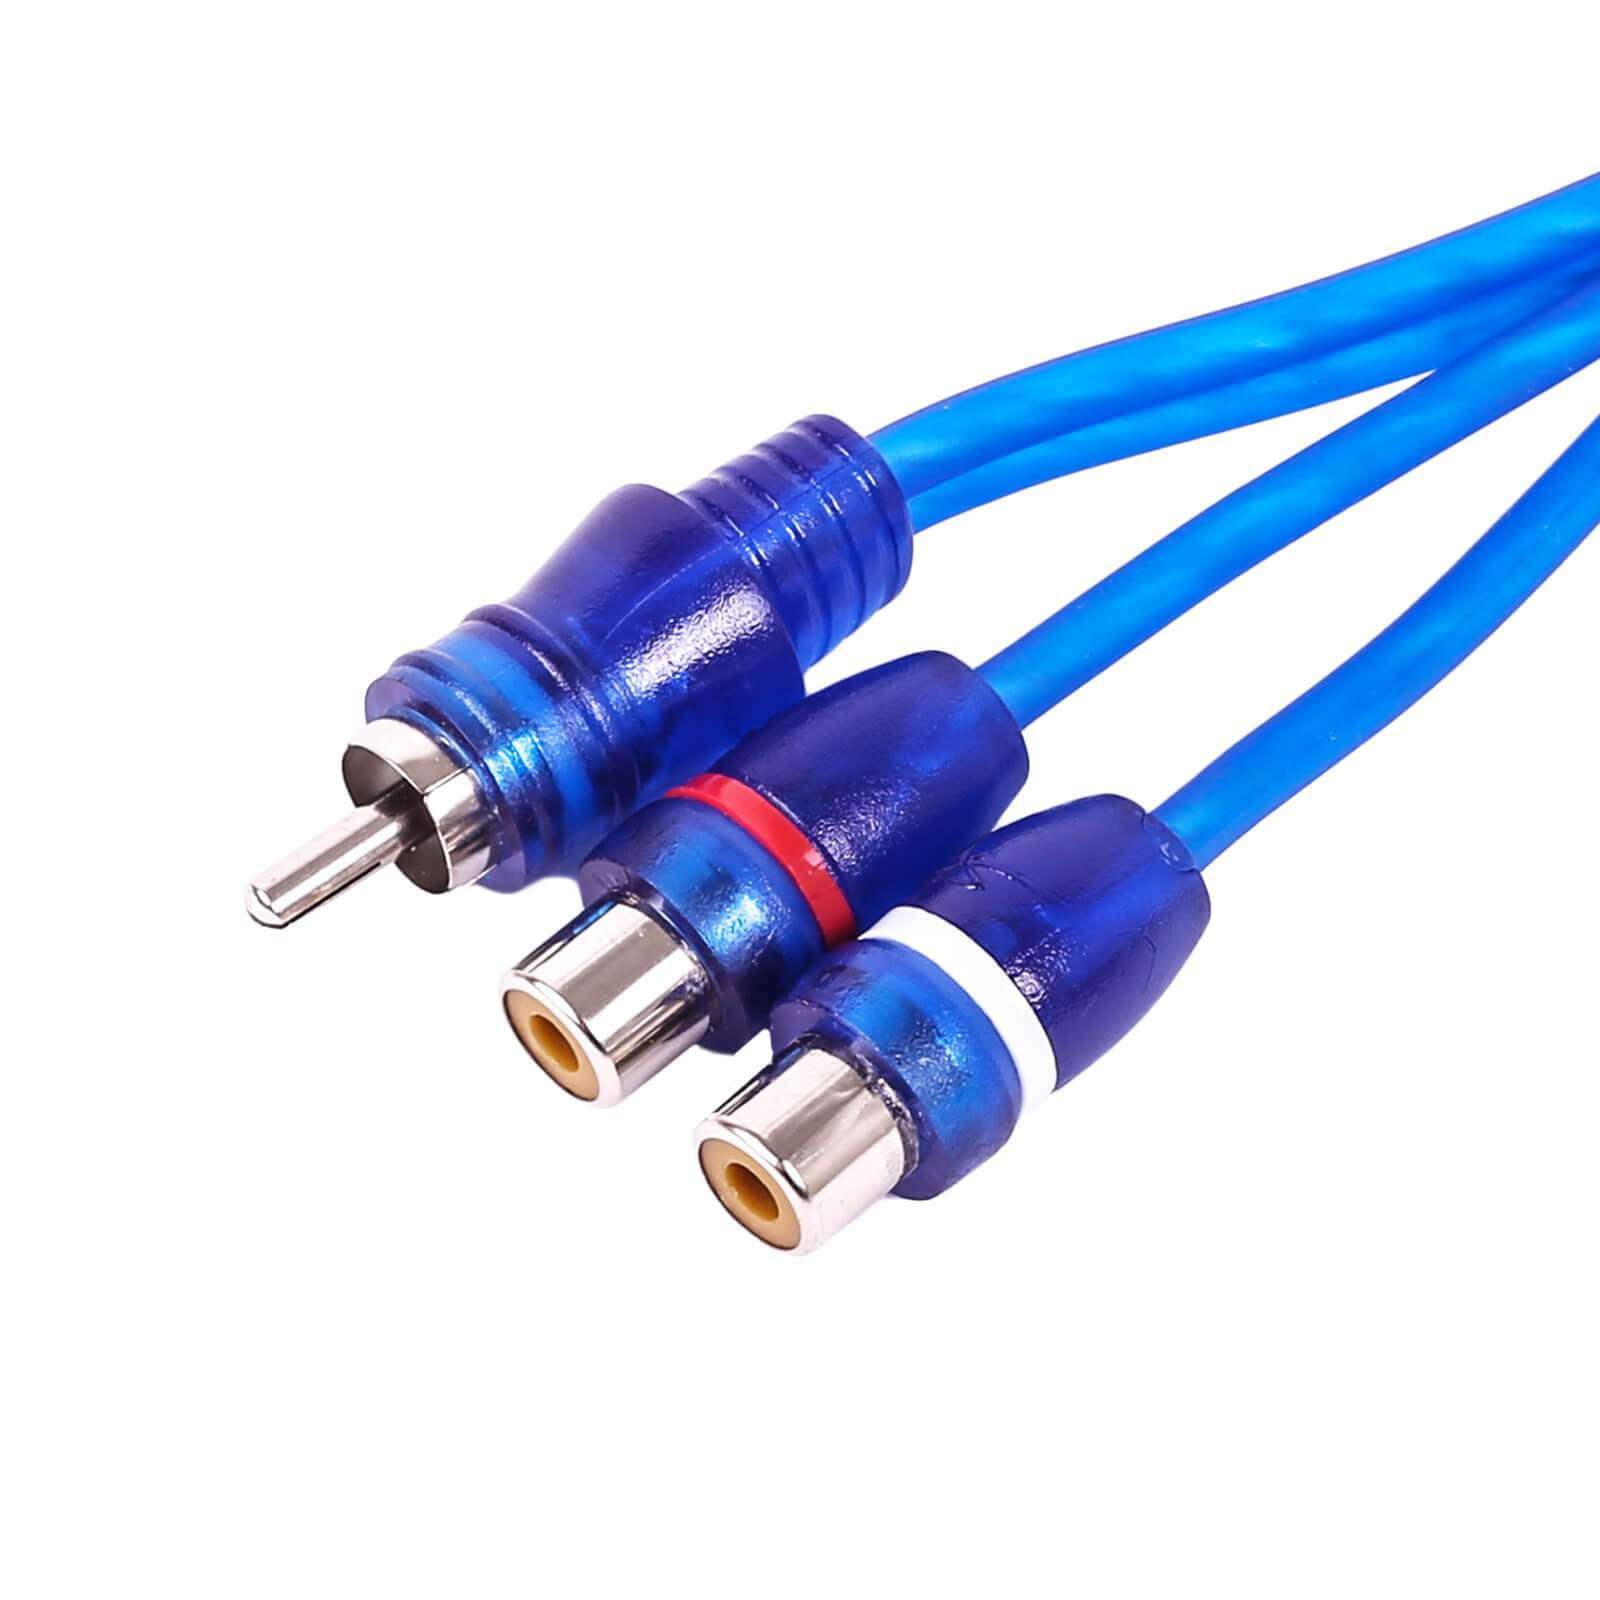 Trend nooit enkel en alleen Absolute RCA Audio Cable "Y" Adapter Splitter 1 Male to 2 Female Plug Cable  - Walmart.com